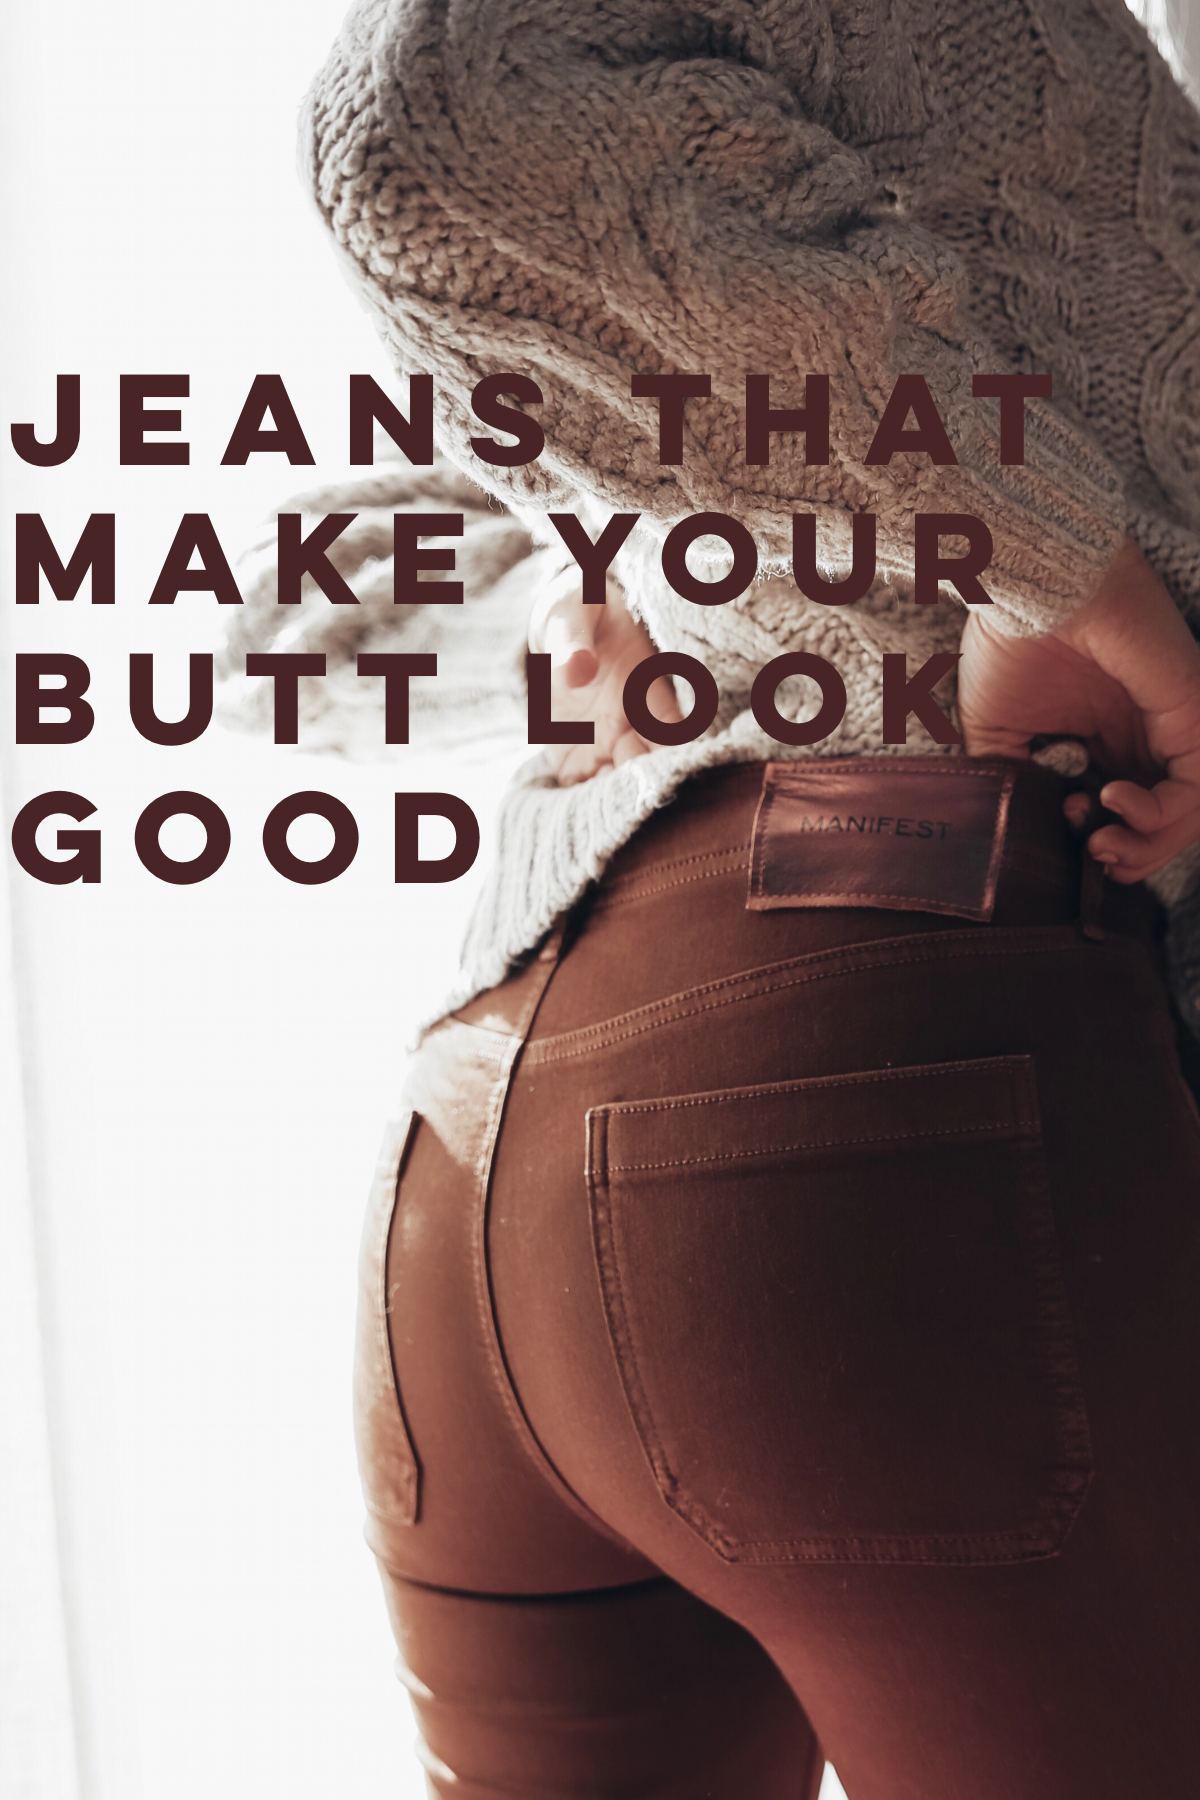 jeans that make your bum look good